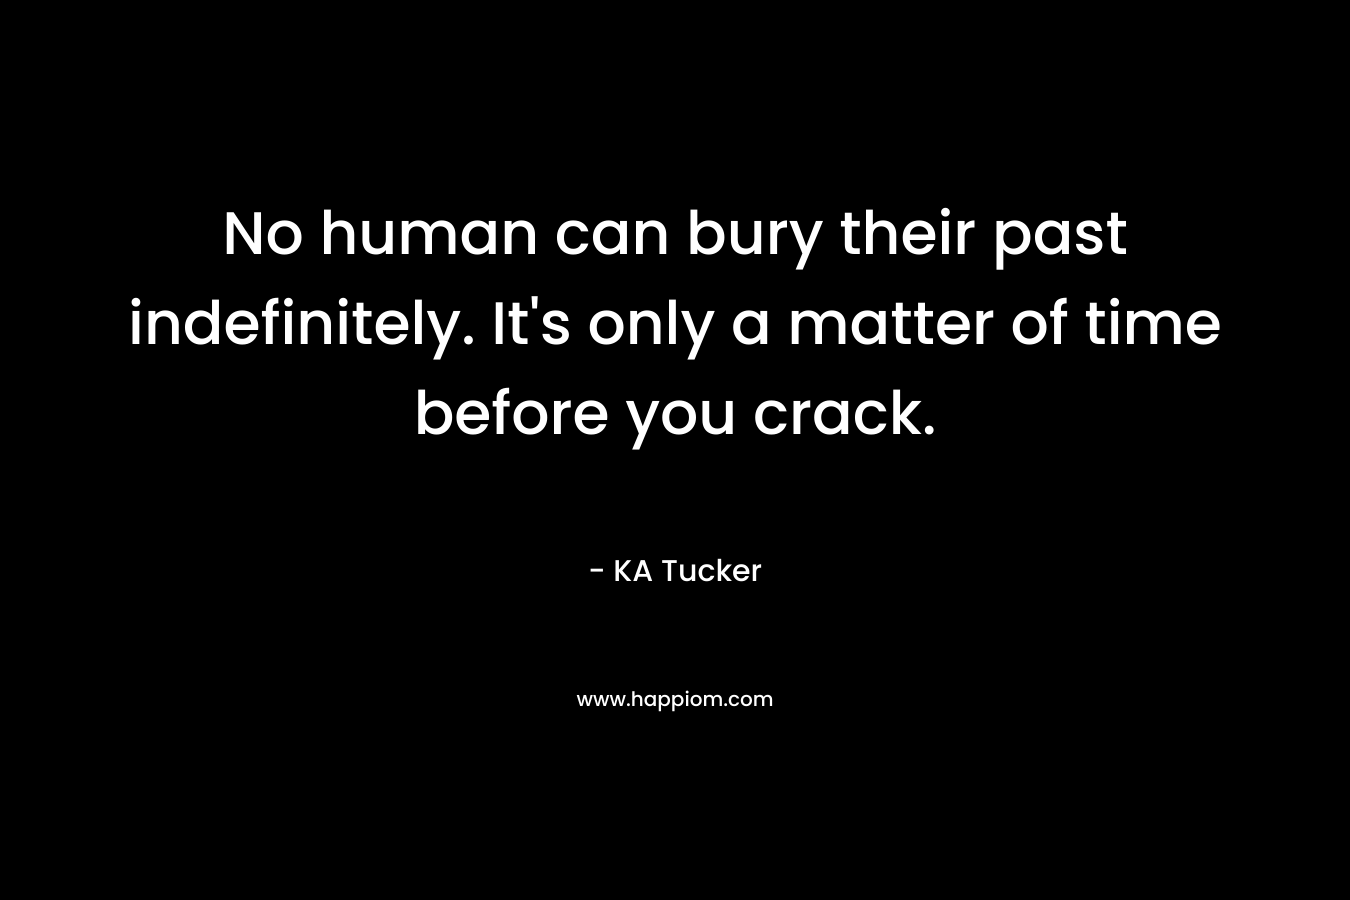 No human can bury their past indefinitely. It’s only a matter of time before you crack. – KA Tucker